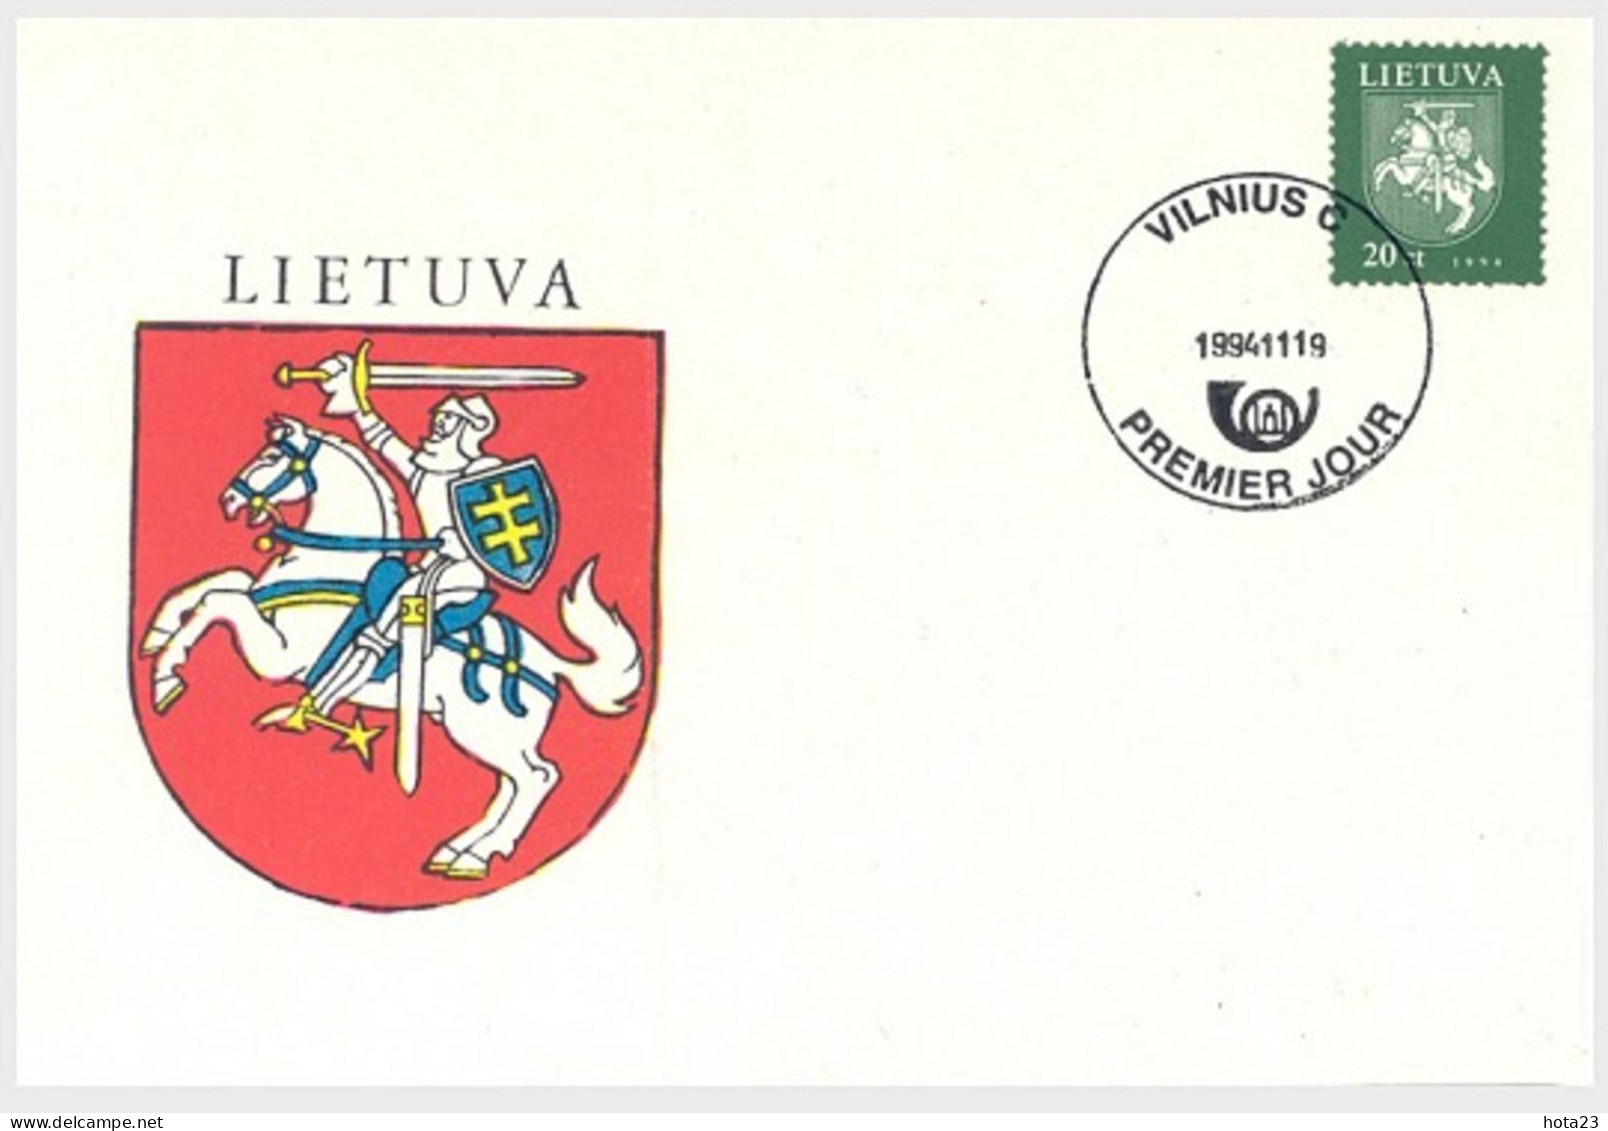 (!) LITHUANIA -MI 571 - Coat Of Arms 1994 Horseman Stamp 20 Ct - FDC - Lituania